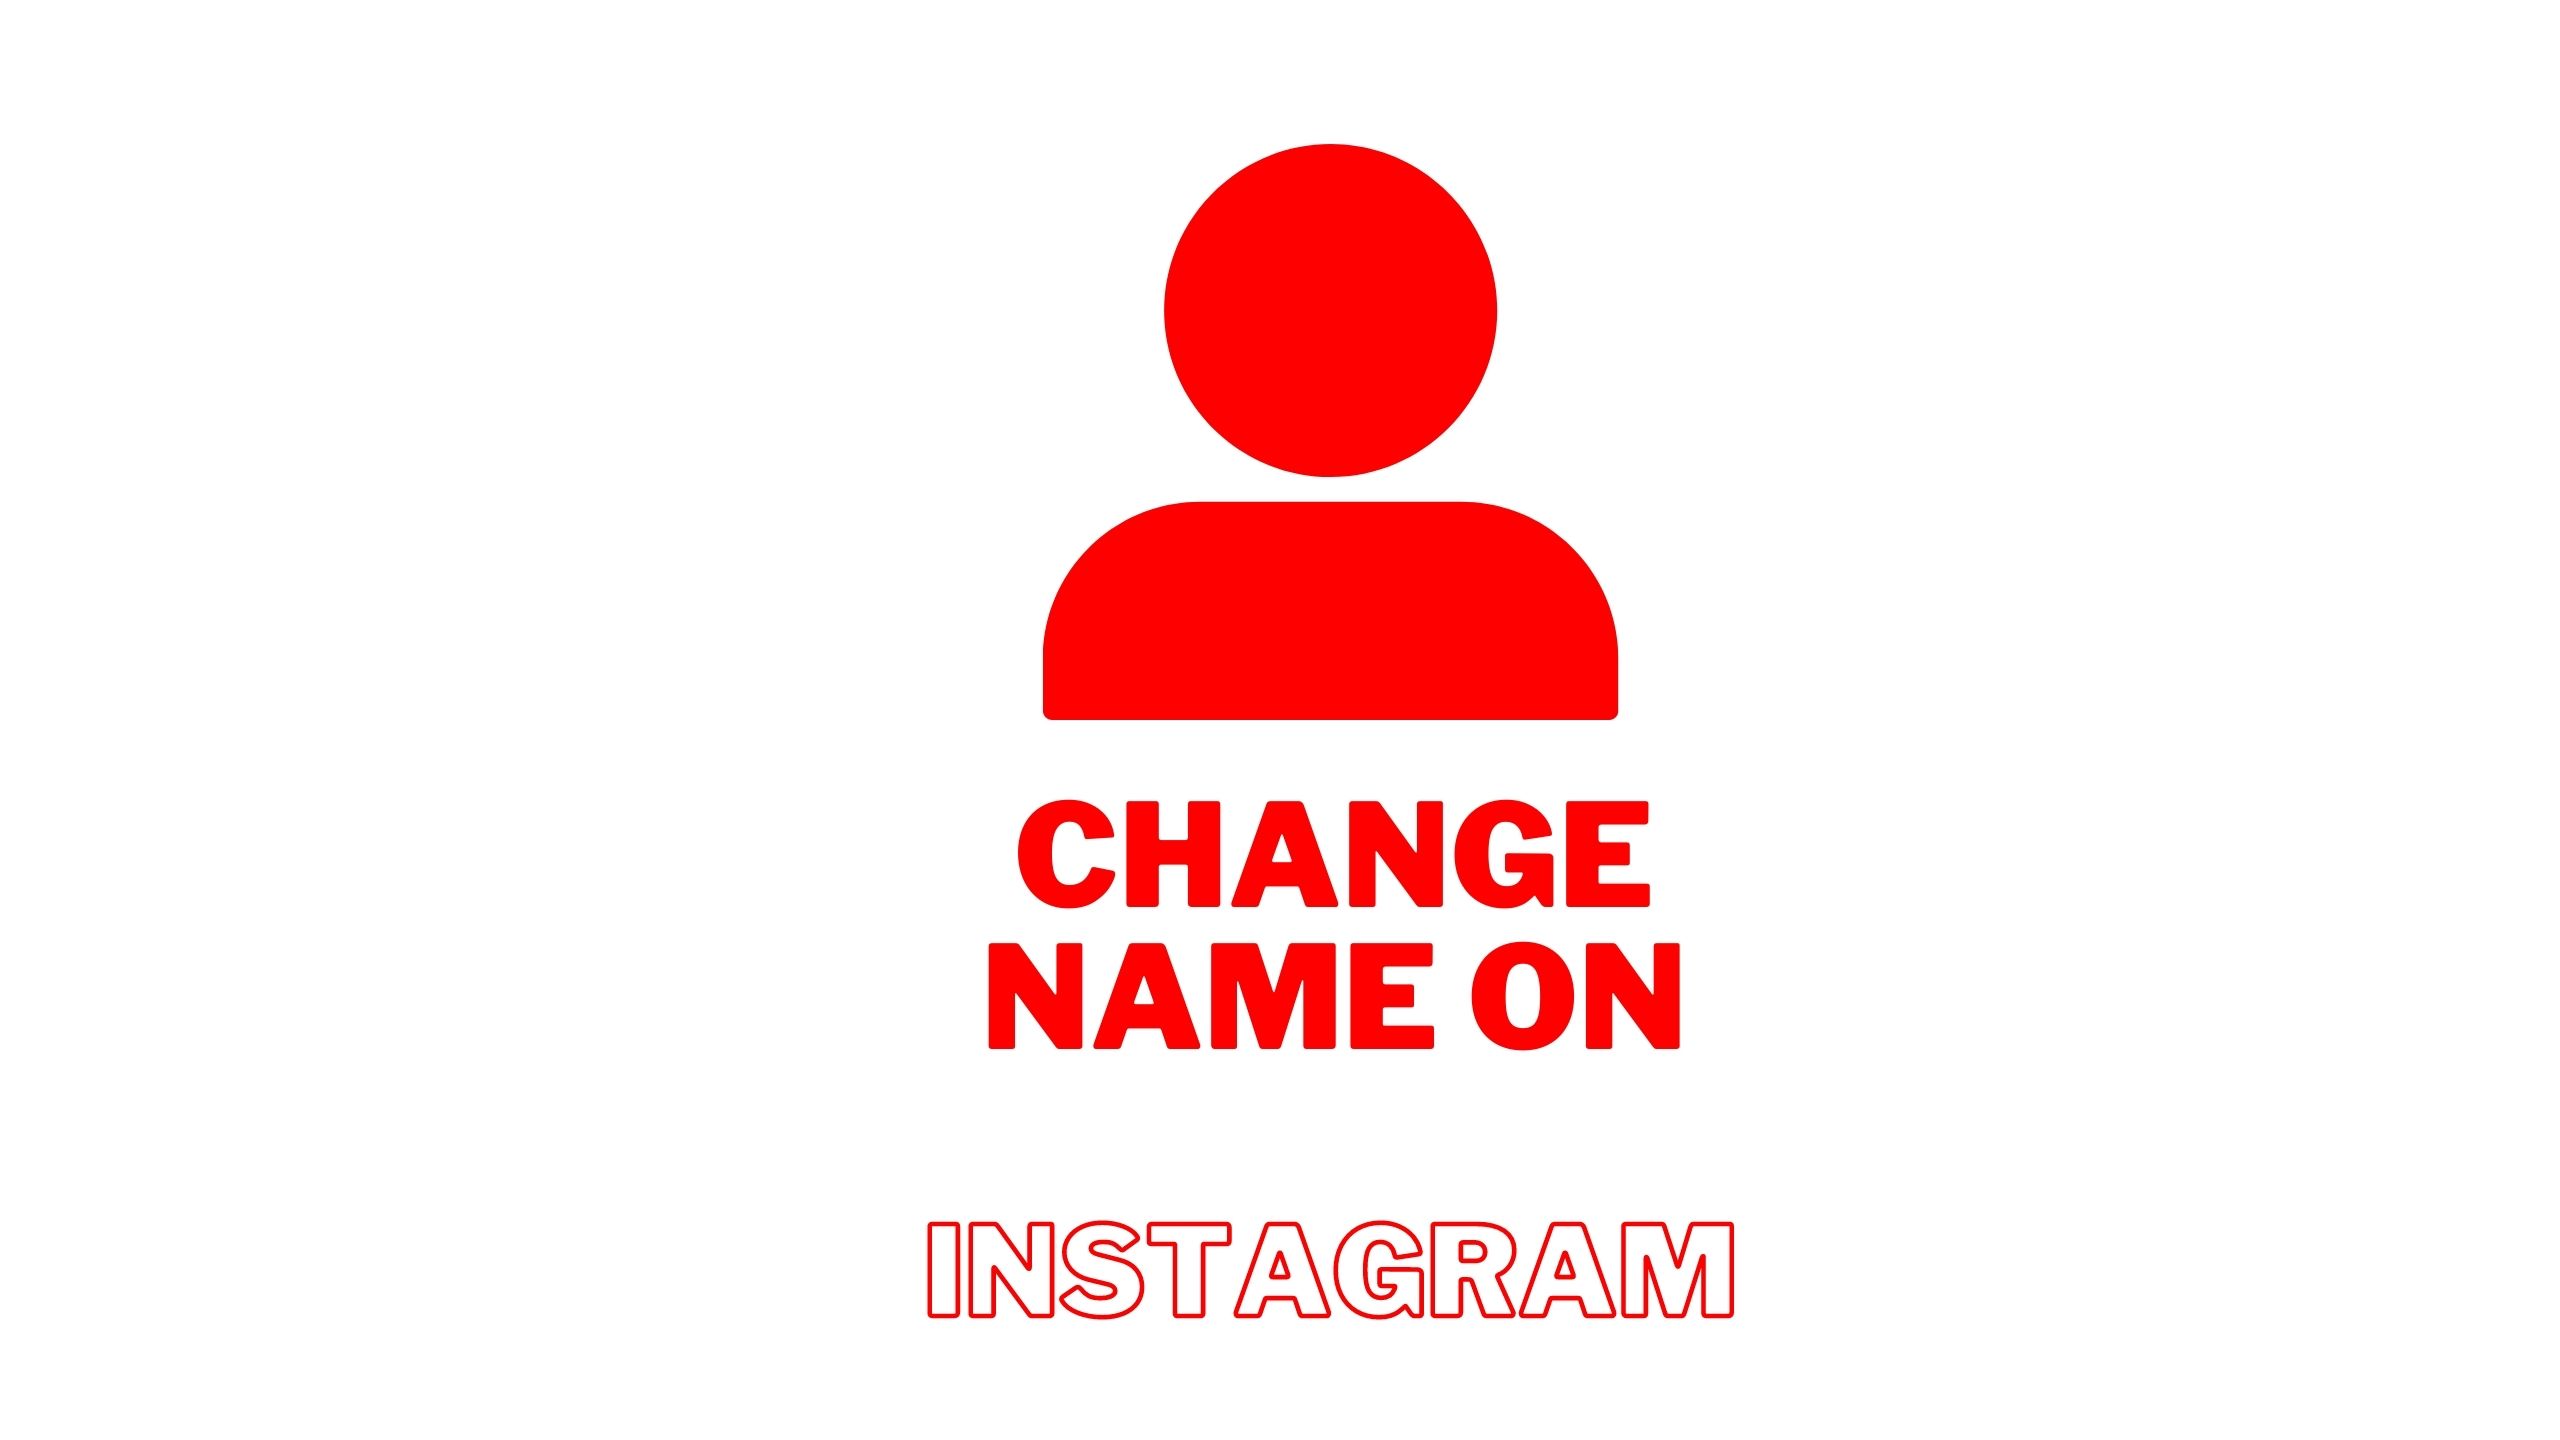 How to change name on Instagram without Facebook